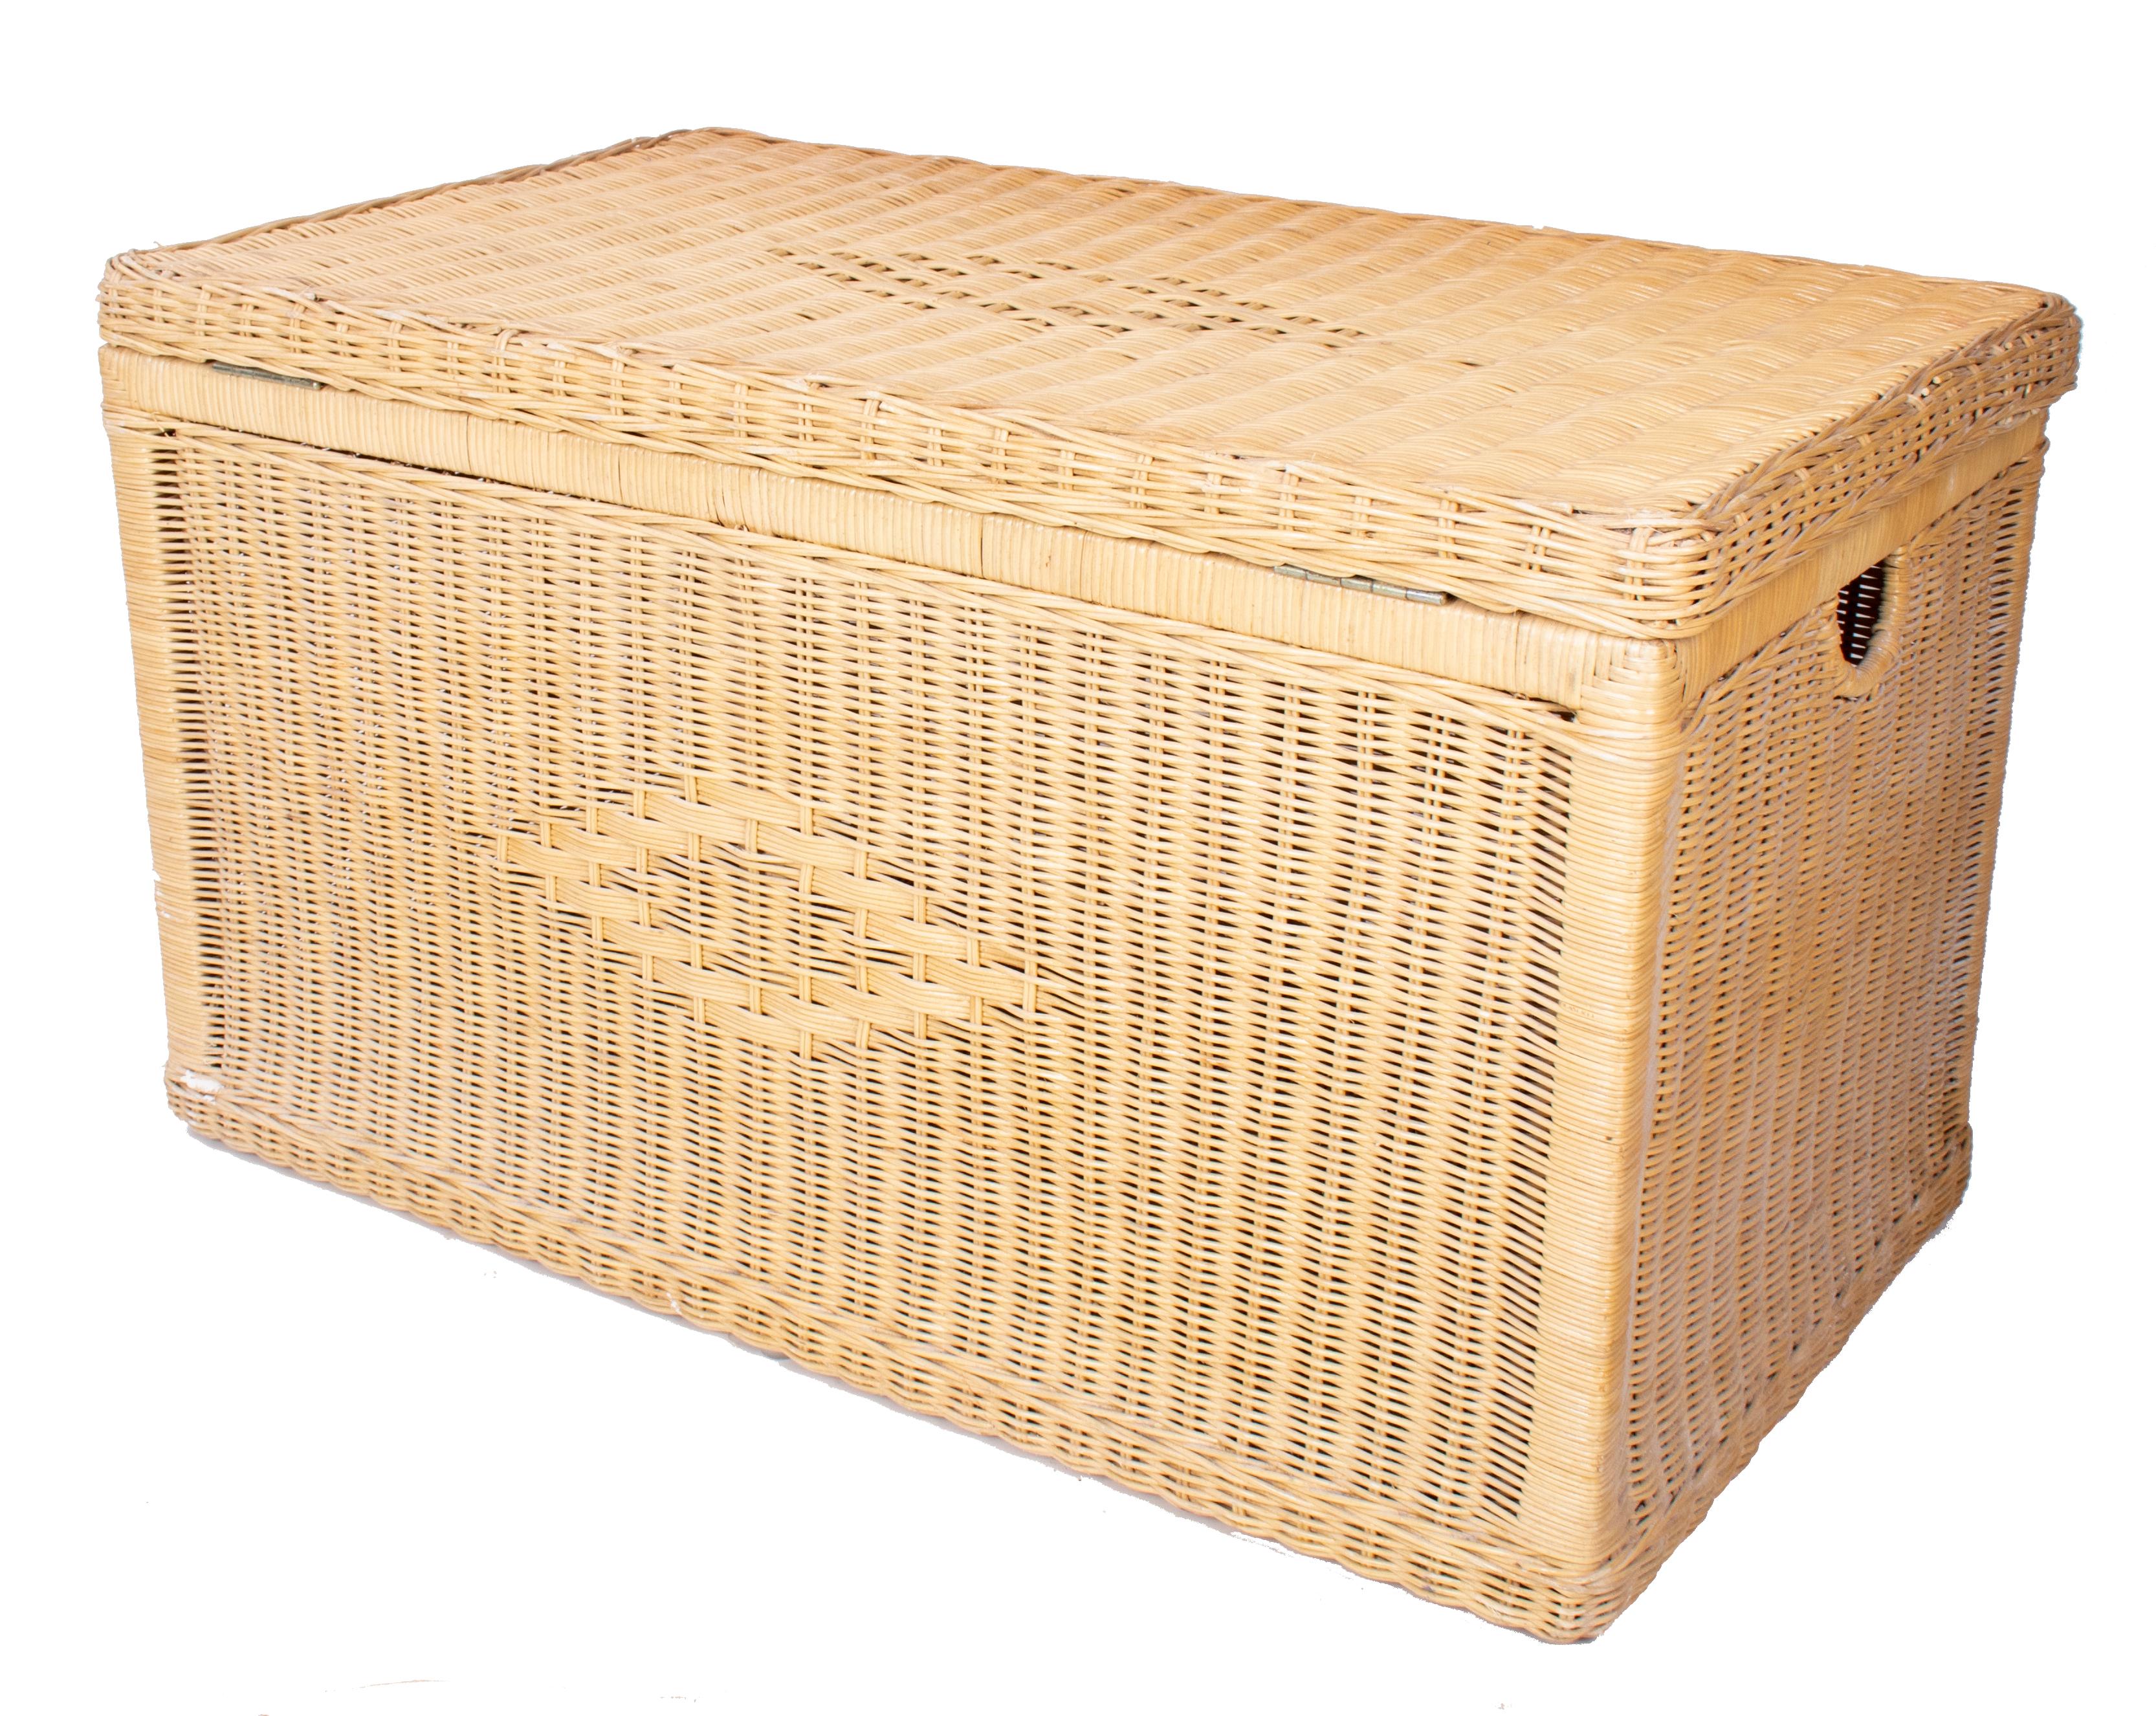 20th Century Vintage Wicker Trunk with Wooden Frame and Lid